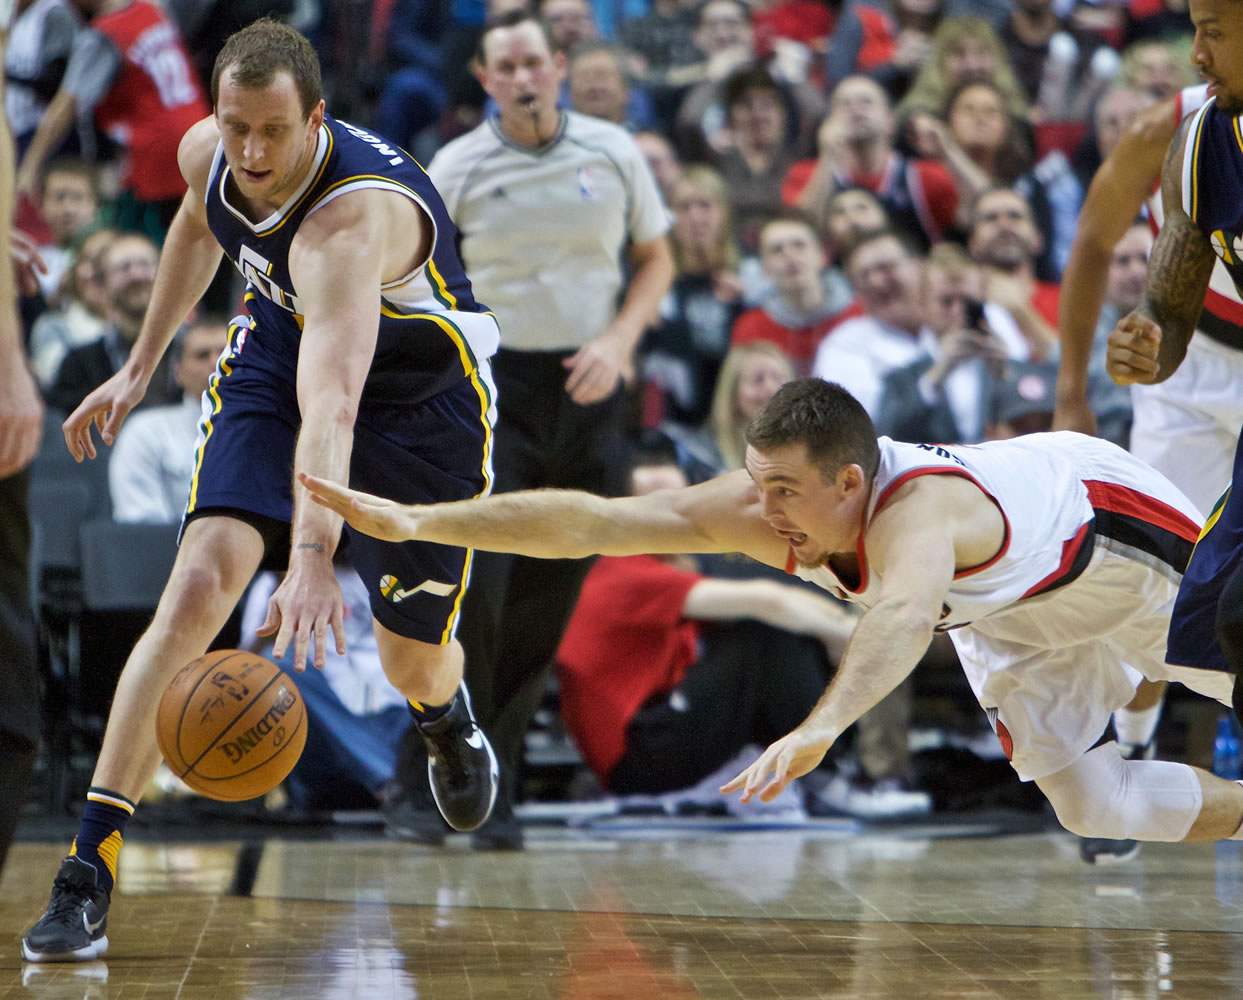 Portland Trail Blazers guard Pat Connaughton, right, dives for the ball in front of Utah Jazz forward Joe Ingles, left, during the second half of an NBA basketball game in Portland, Ore., Wednesday, Jan. 13, 2016. The Trail Blazers won 99-85.